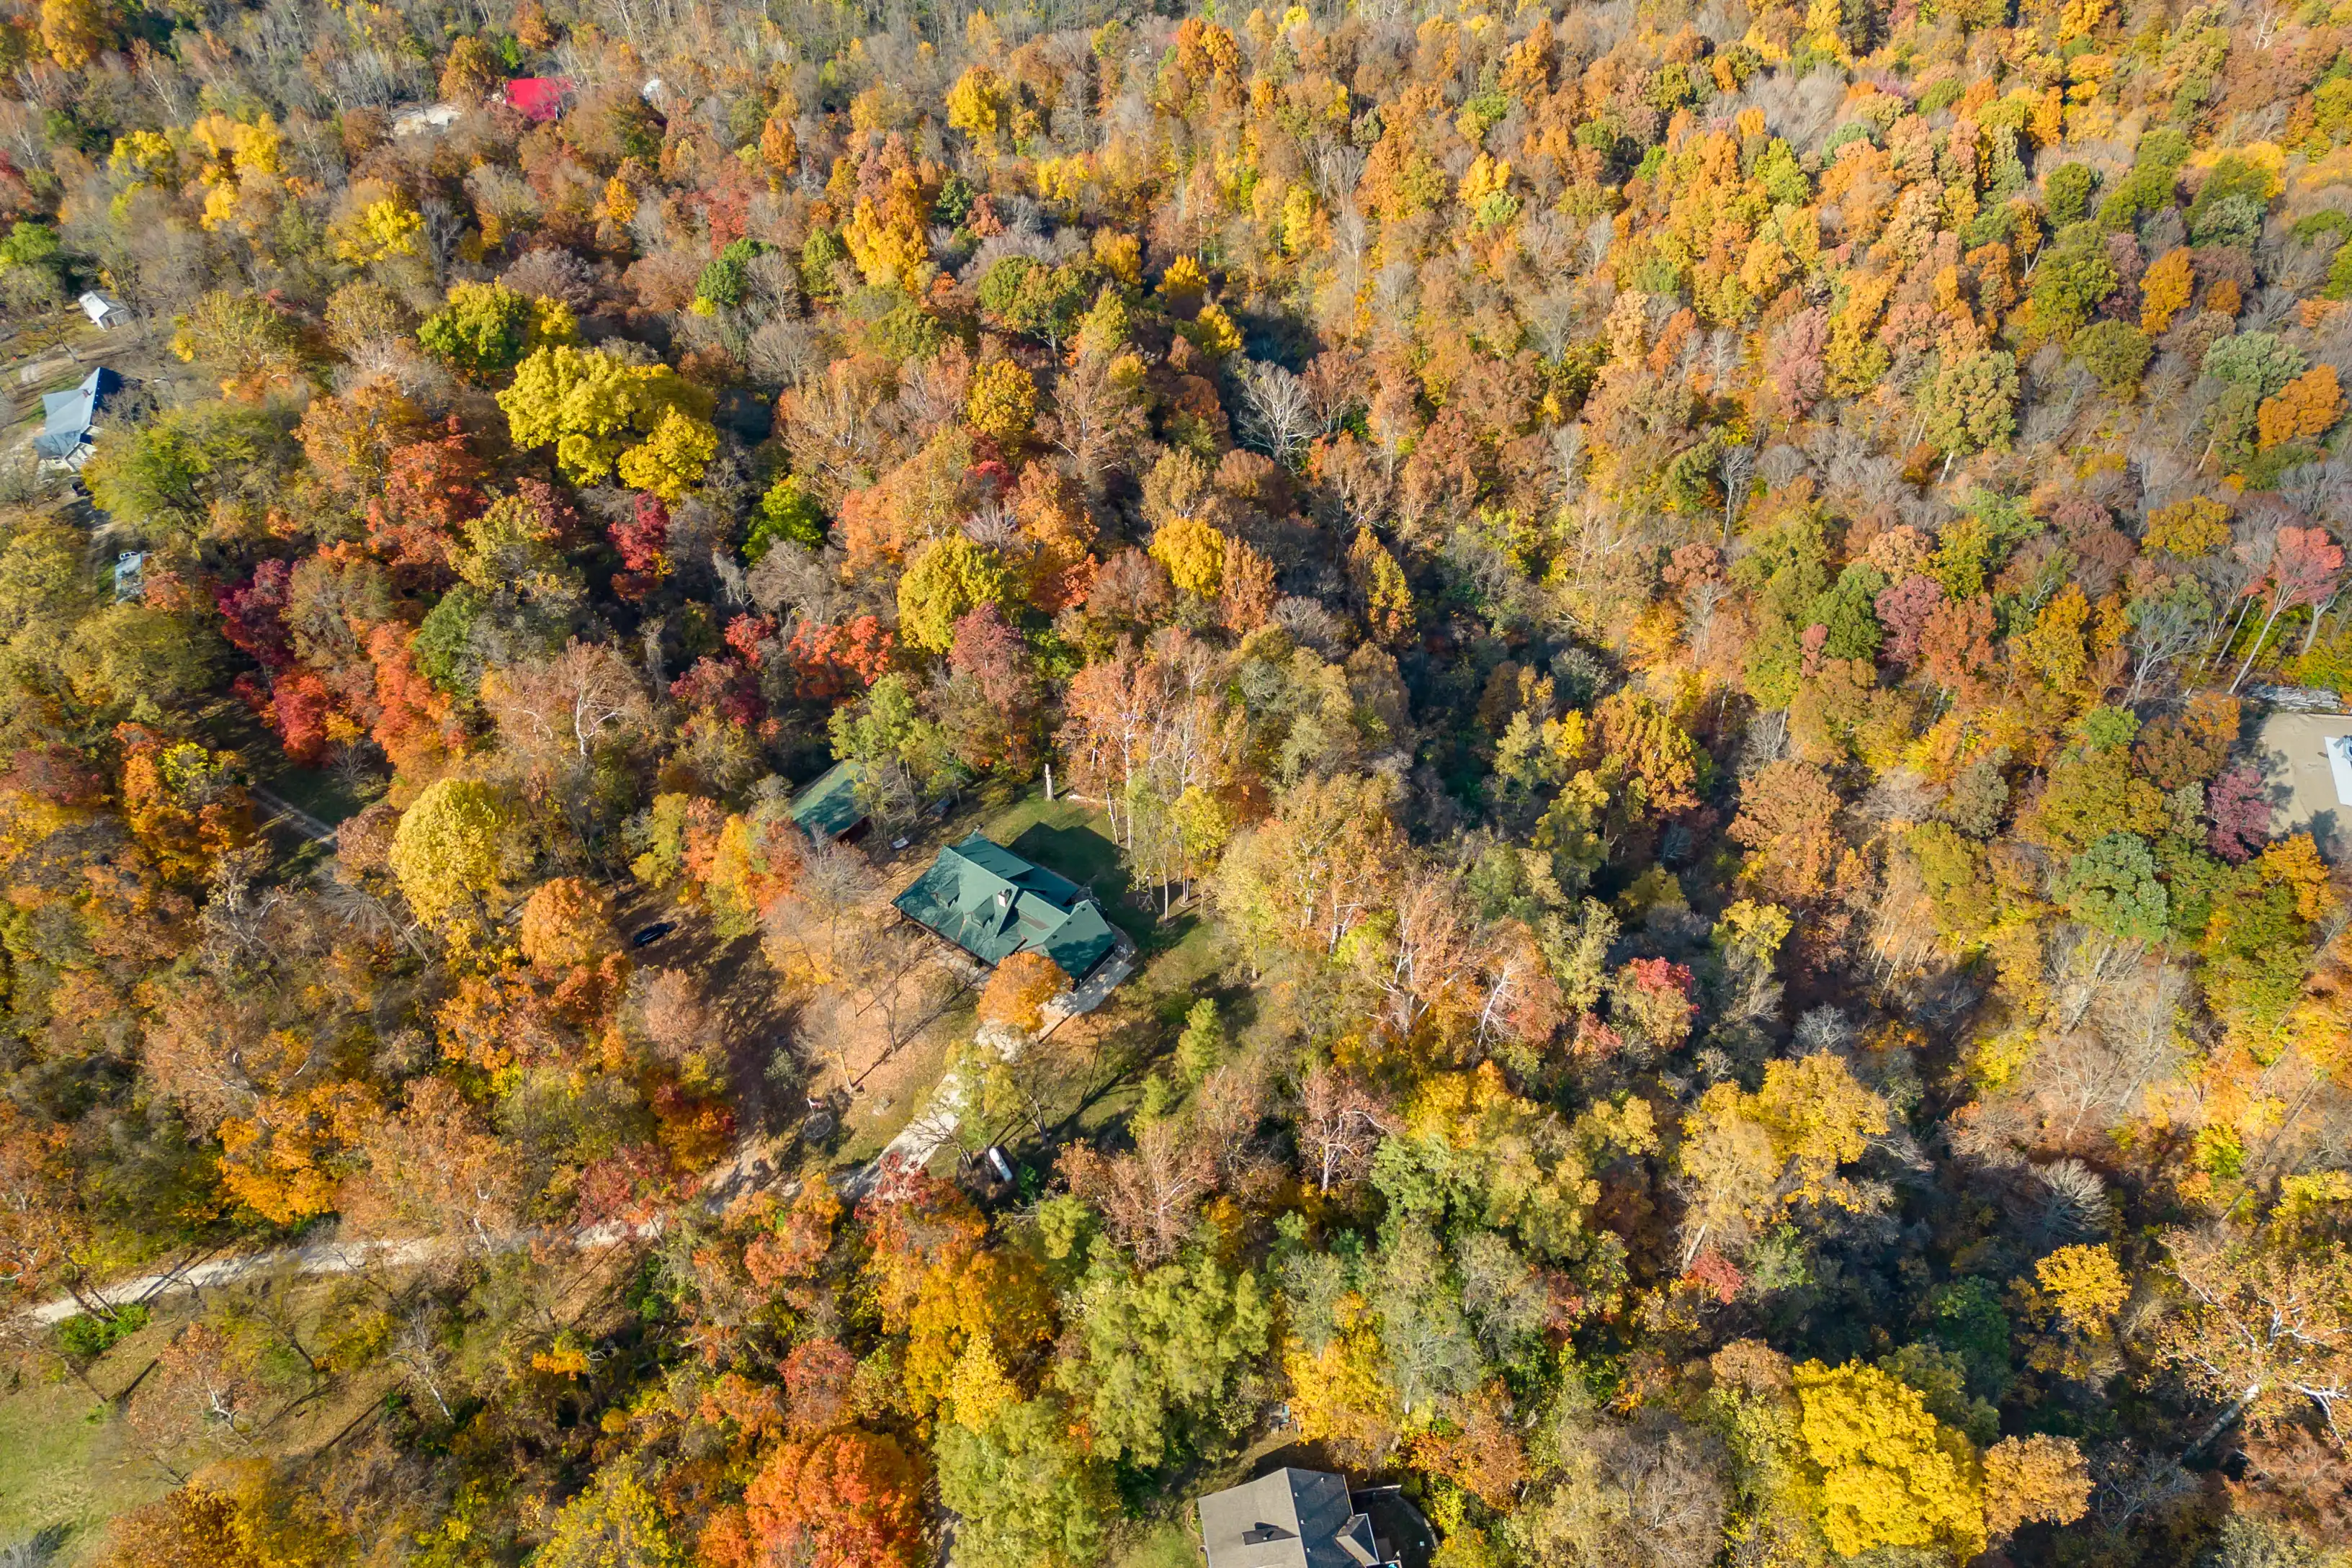 Aerial view of a forested area with trees displaying autumn foliage and houses partially hidden by the canopy.